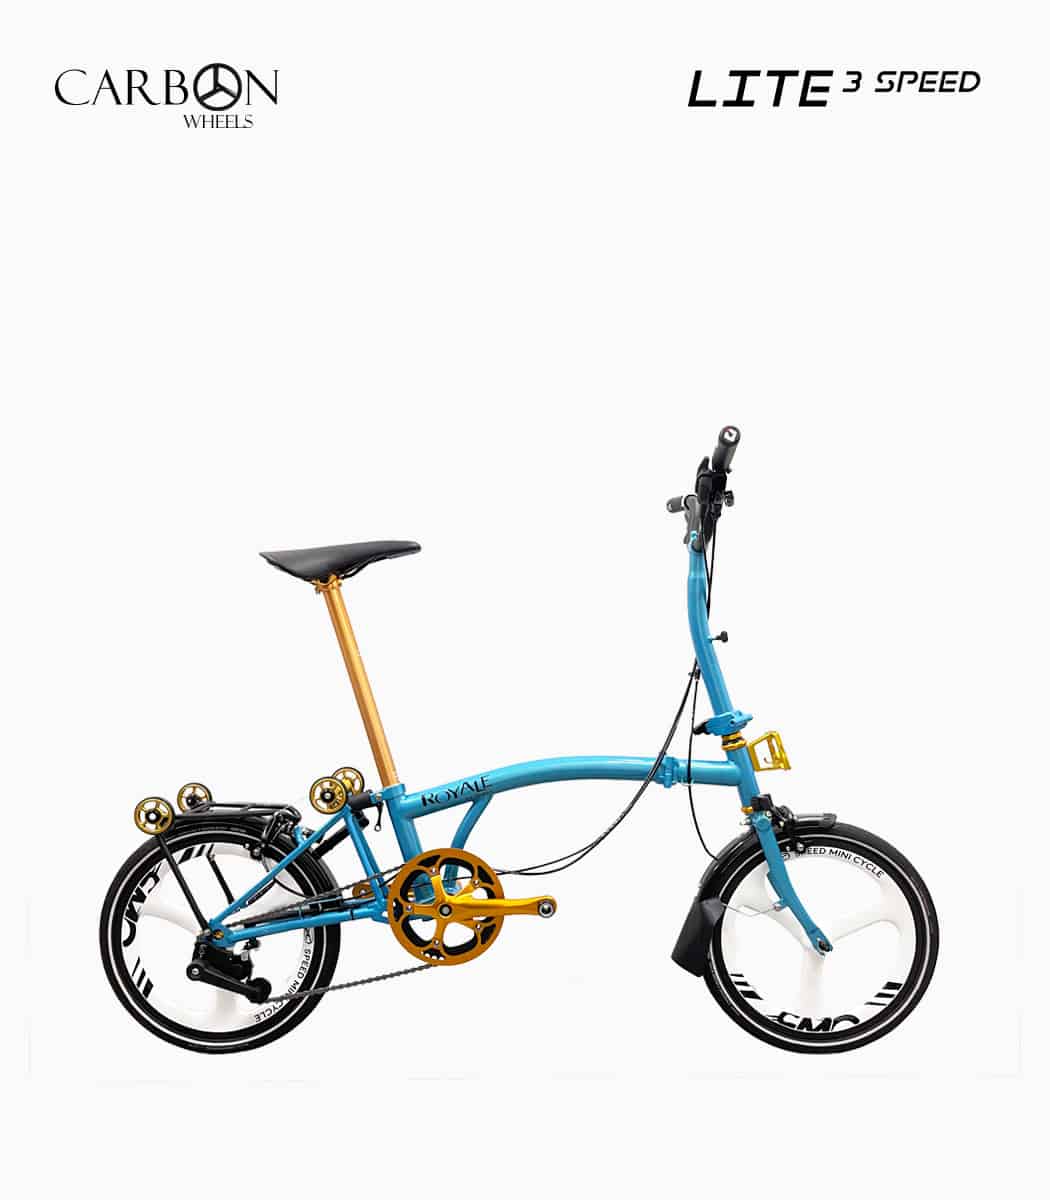 ROYALE Carbon Lite M3 (SKY) foldable bicycle right